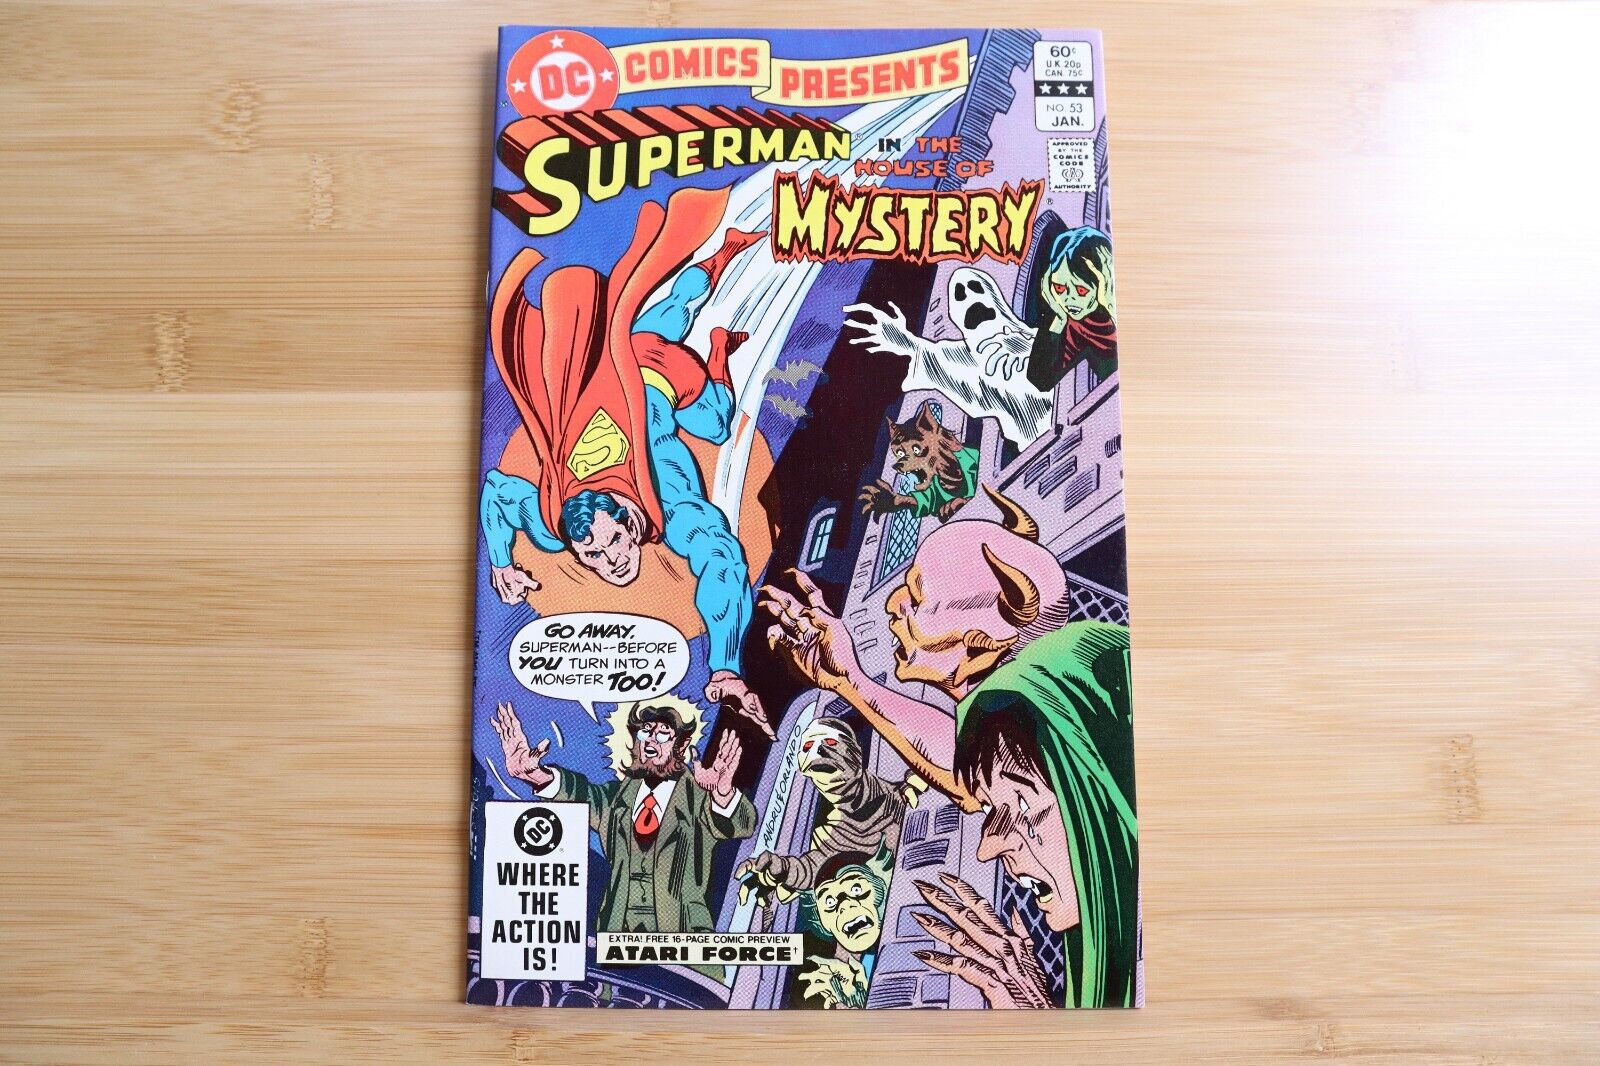 DC Comics Presents Superman in the House of Mystery #53 VF/NM - 1983